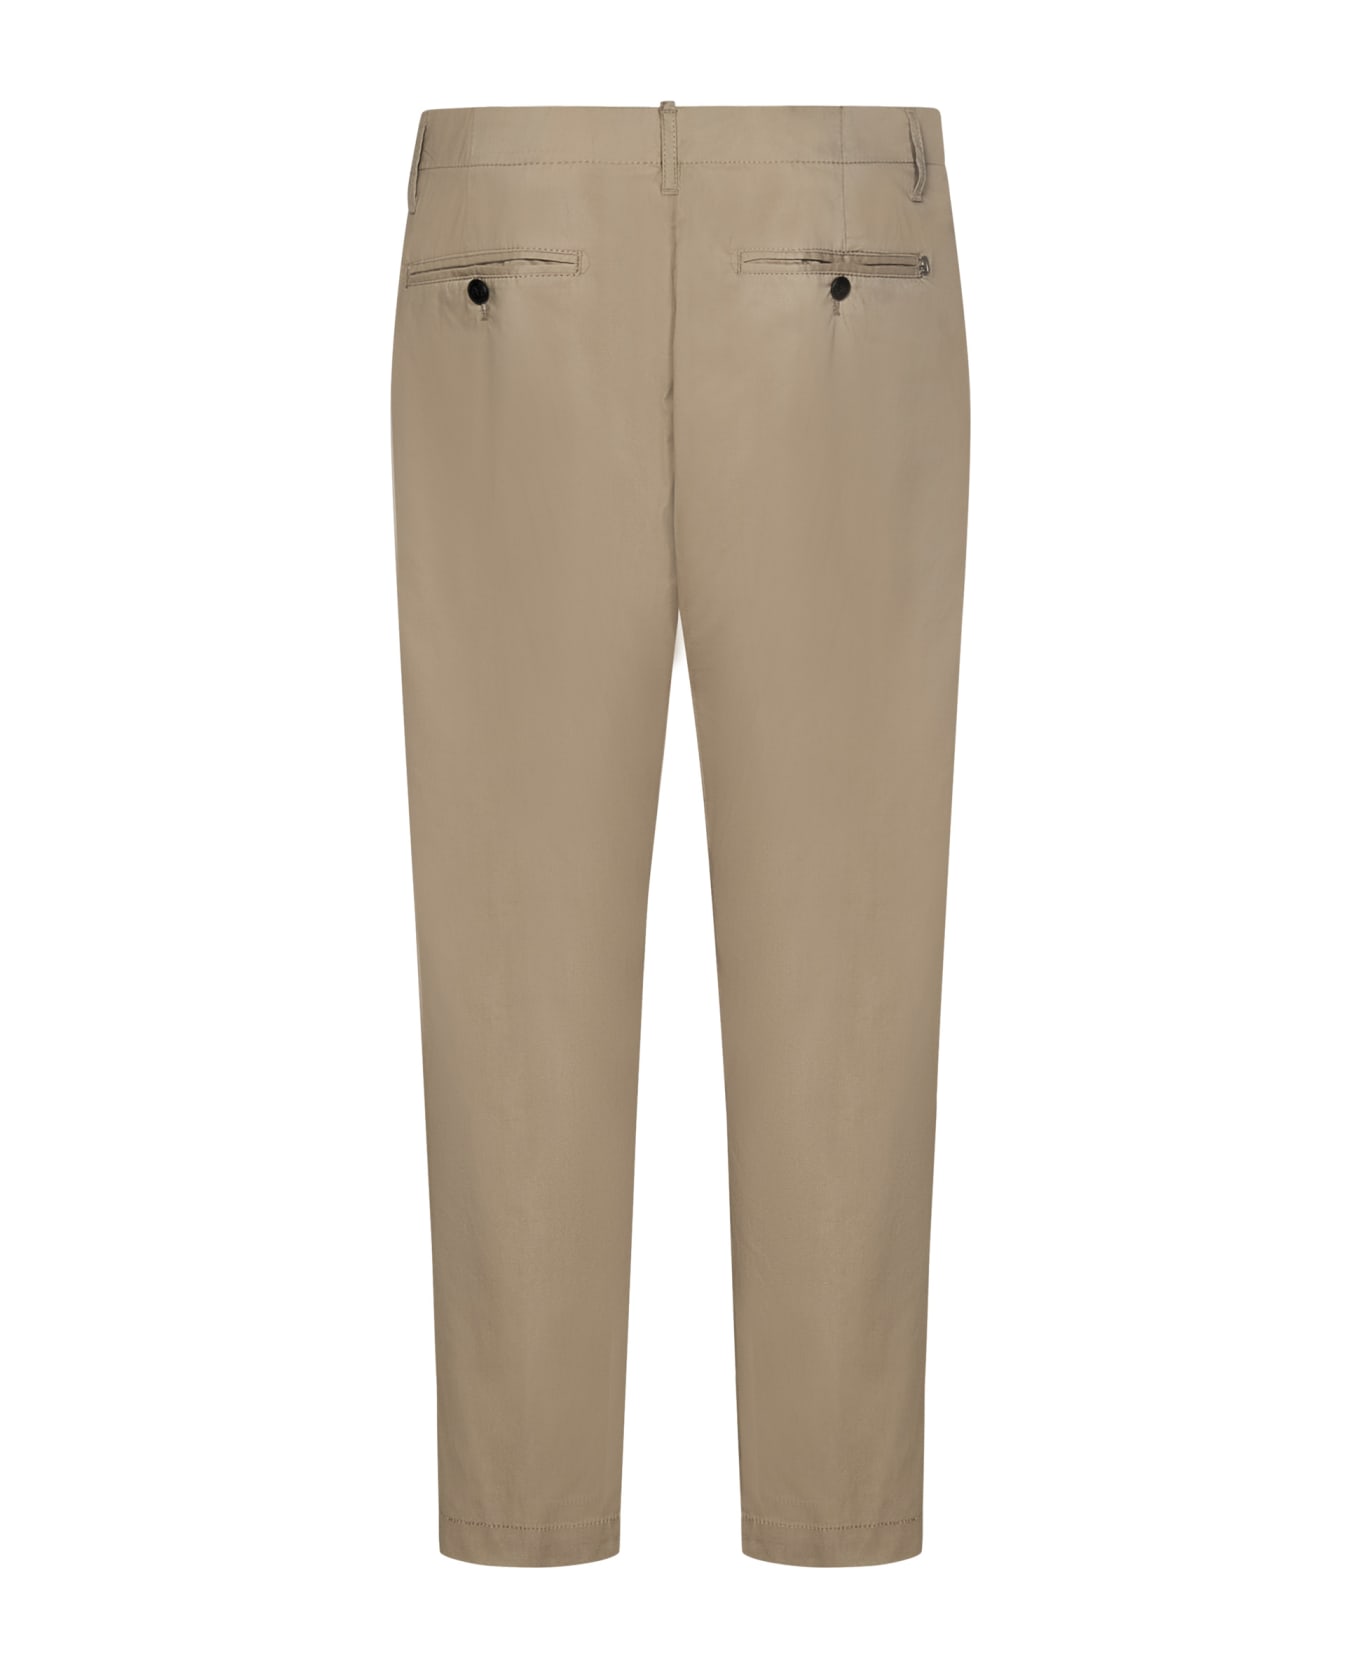 Dondup Ben Trousers - Beige ボトムス